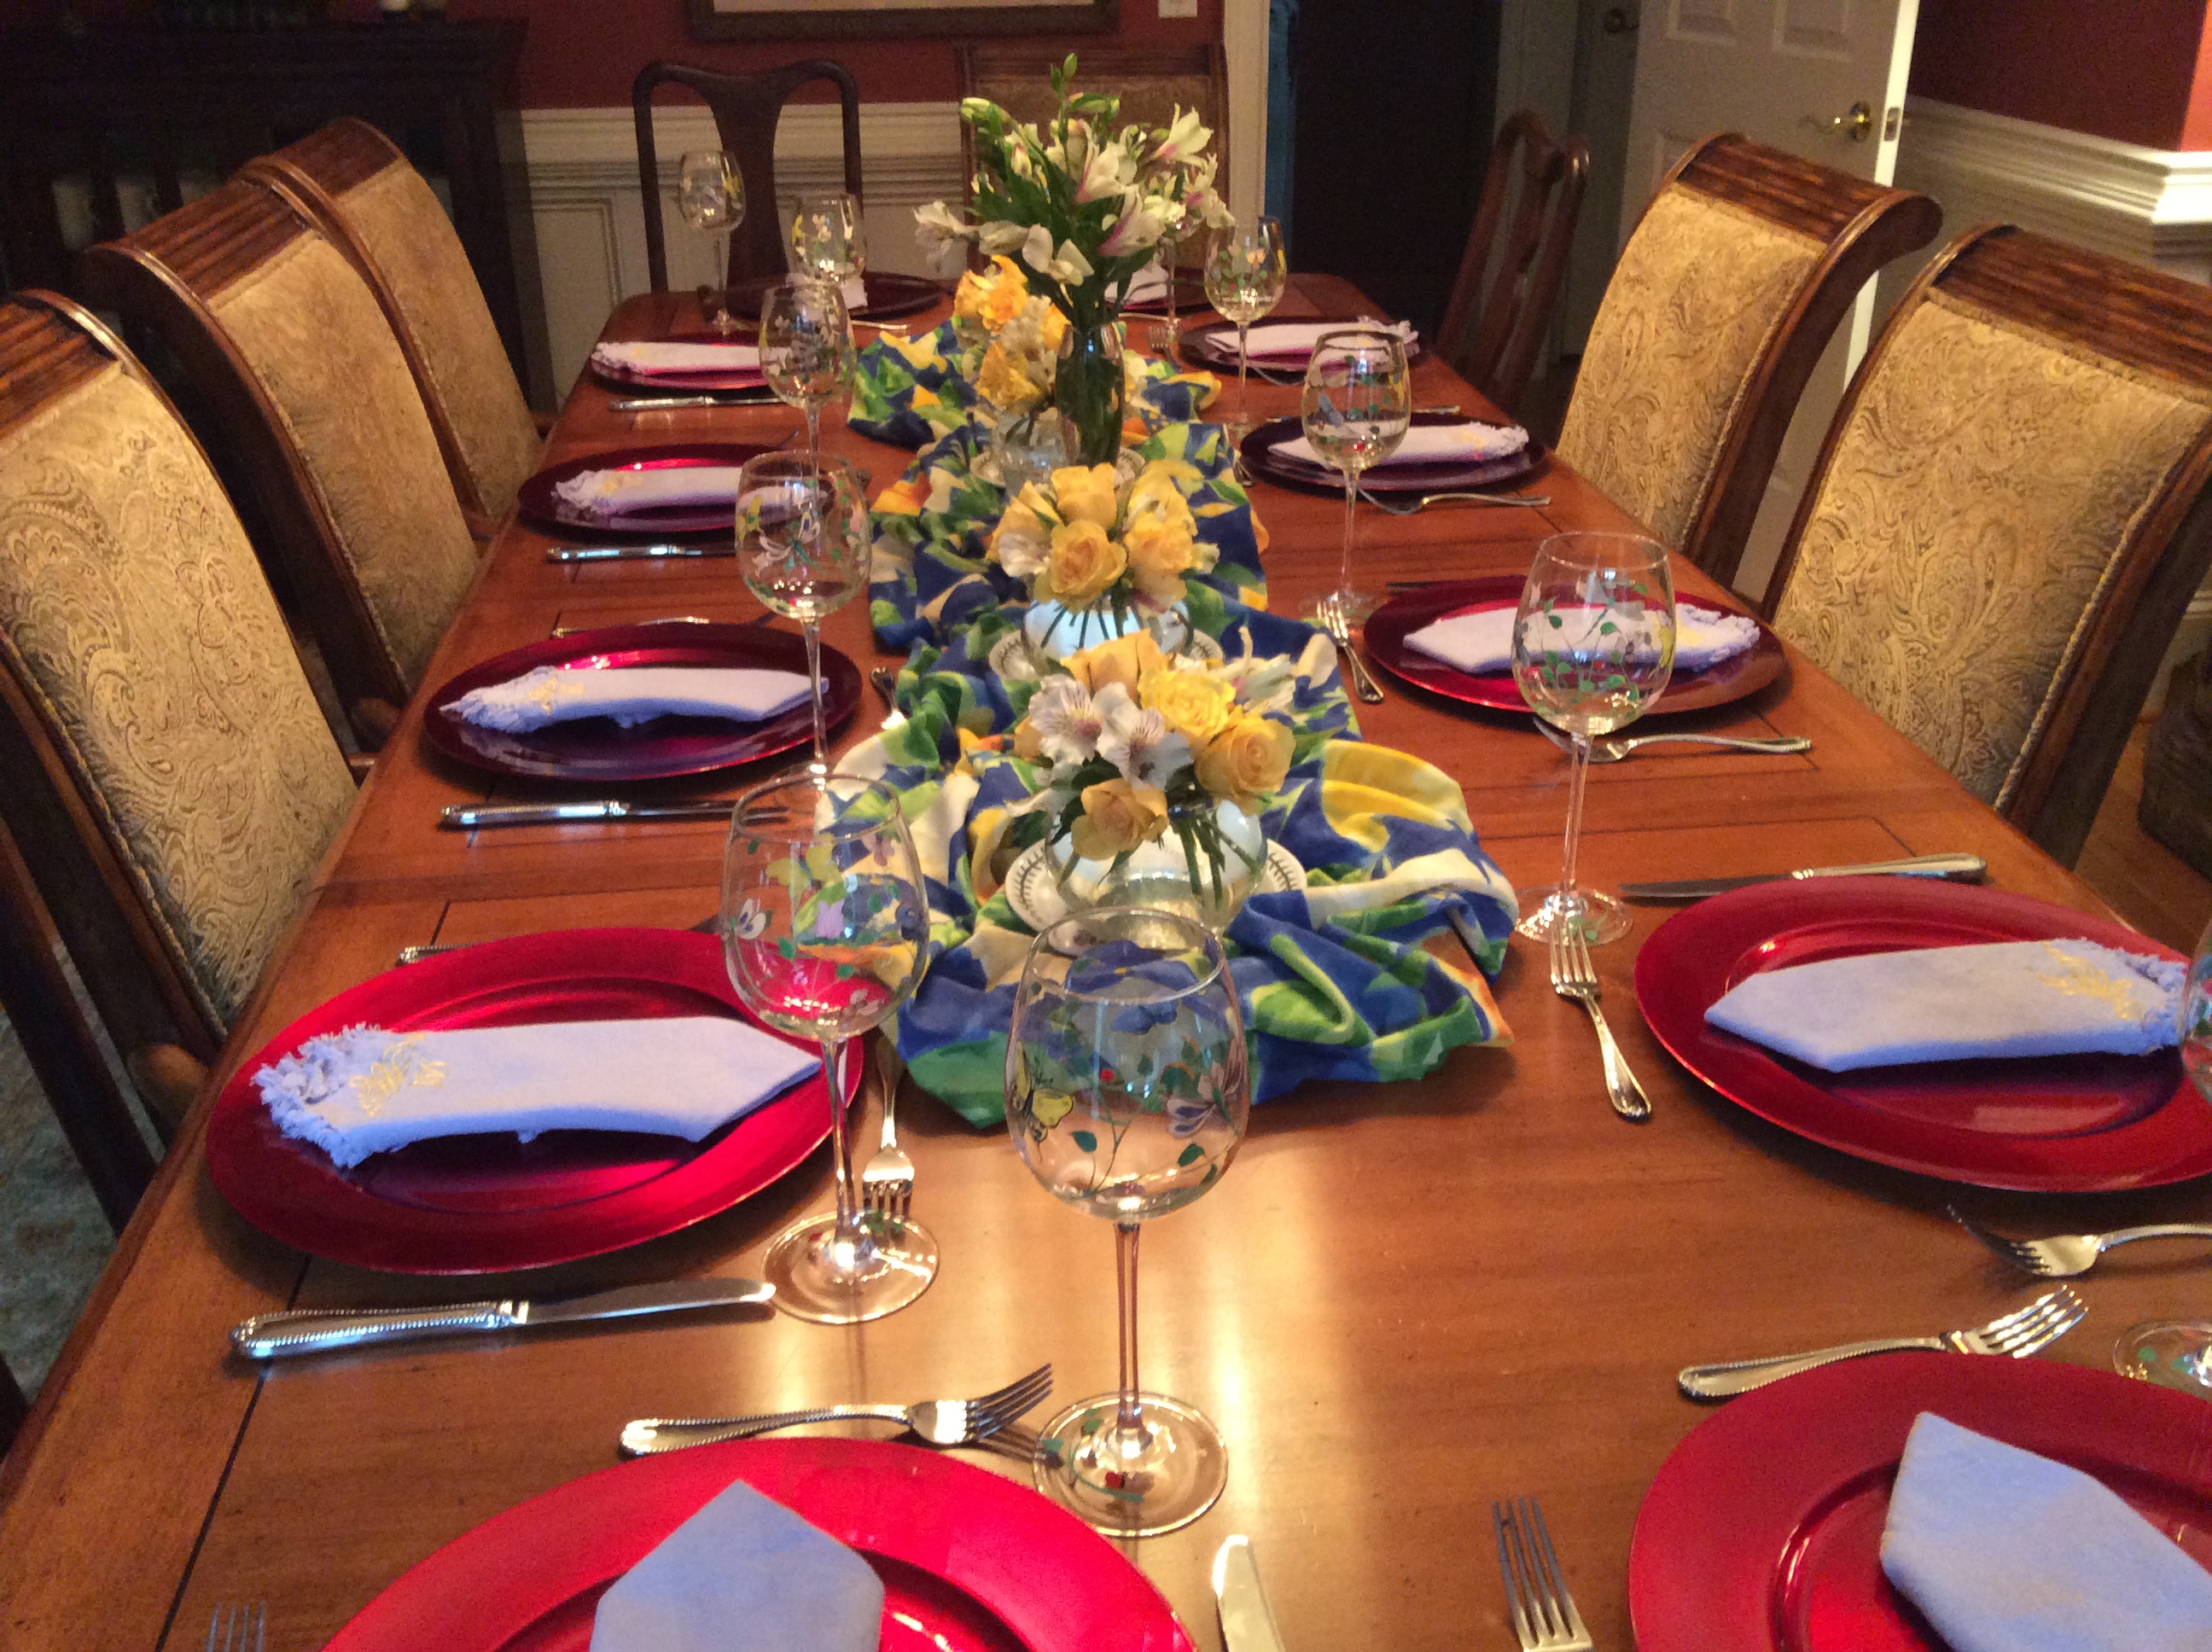 Set a pretty table with flowers and fabric down the middle.